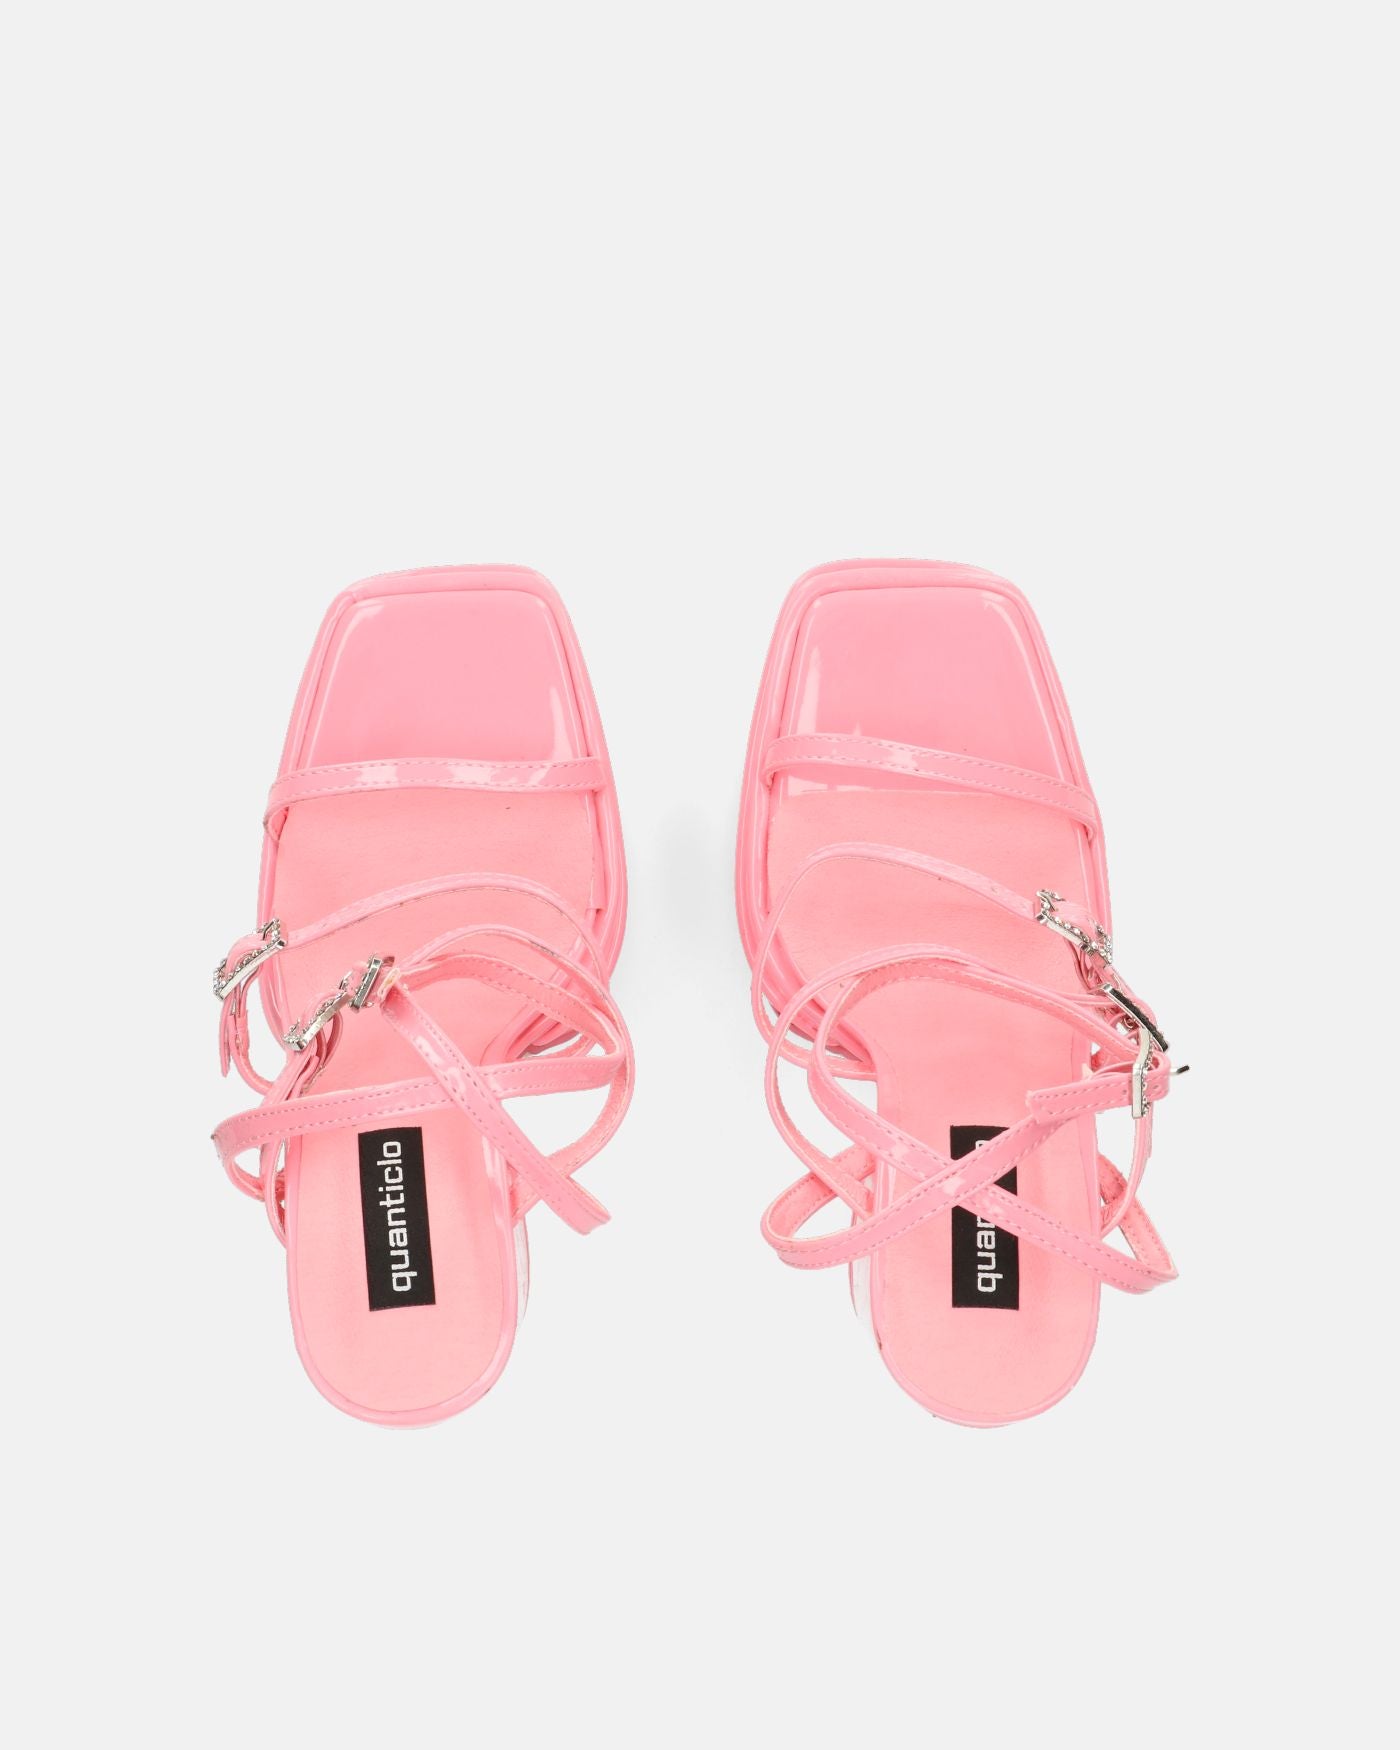 TEXA - sandals with strap and high heel in pink